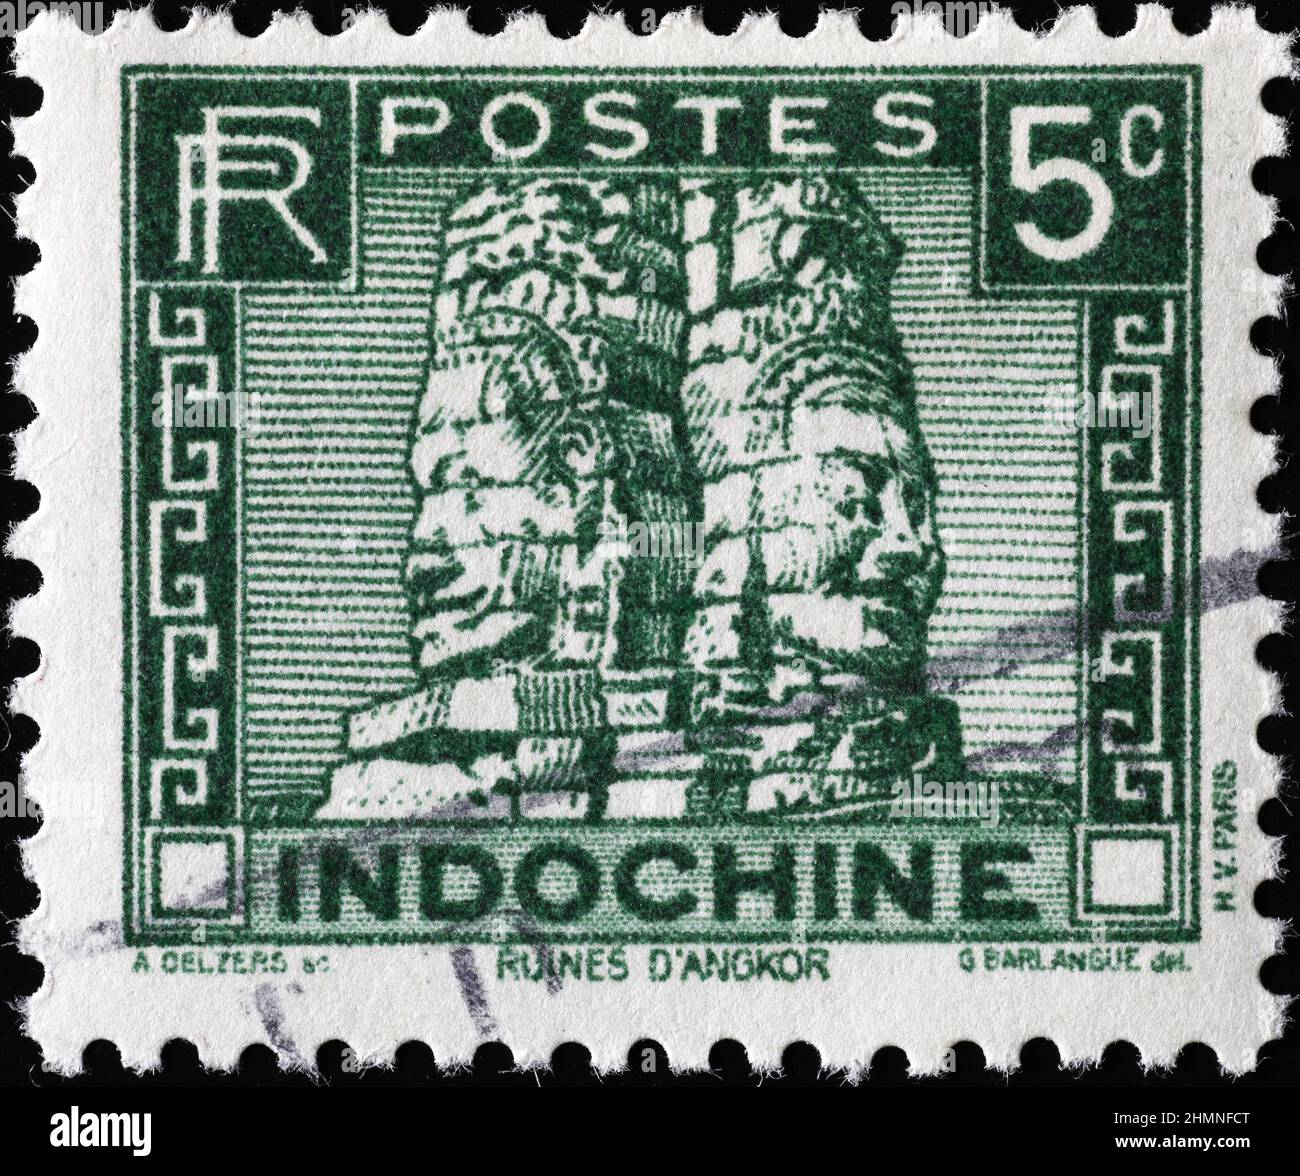 Ruins of Angkor ol old indochinese stamp Stock Photo